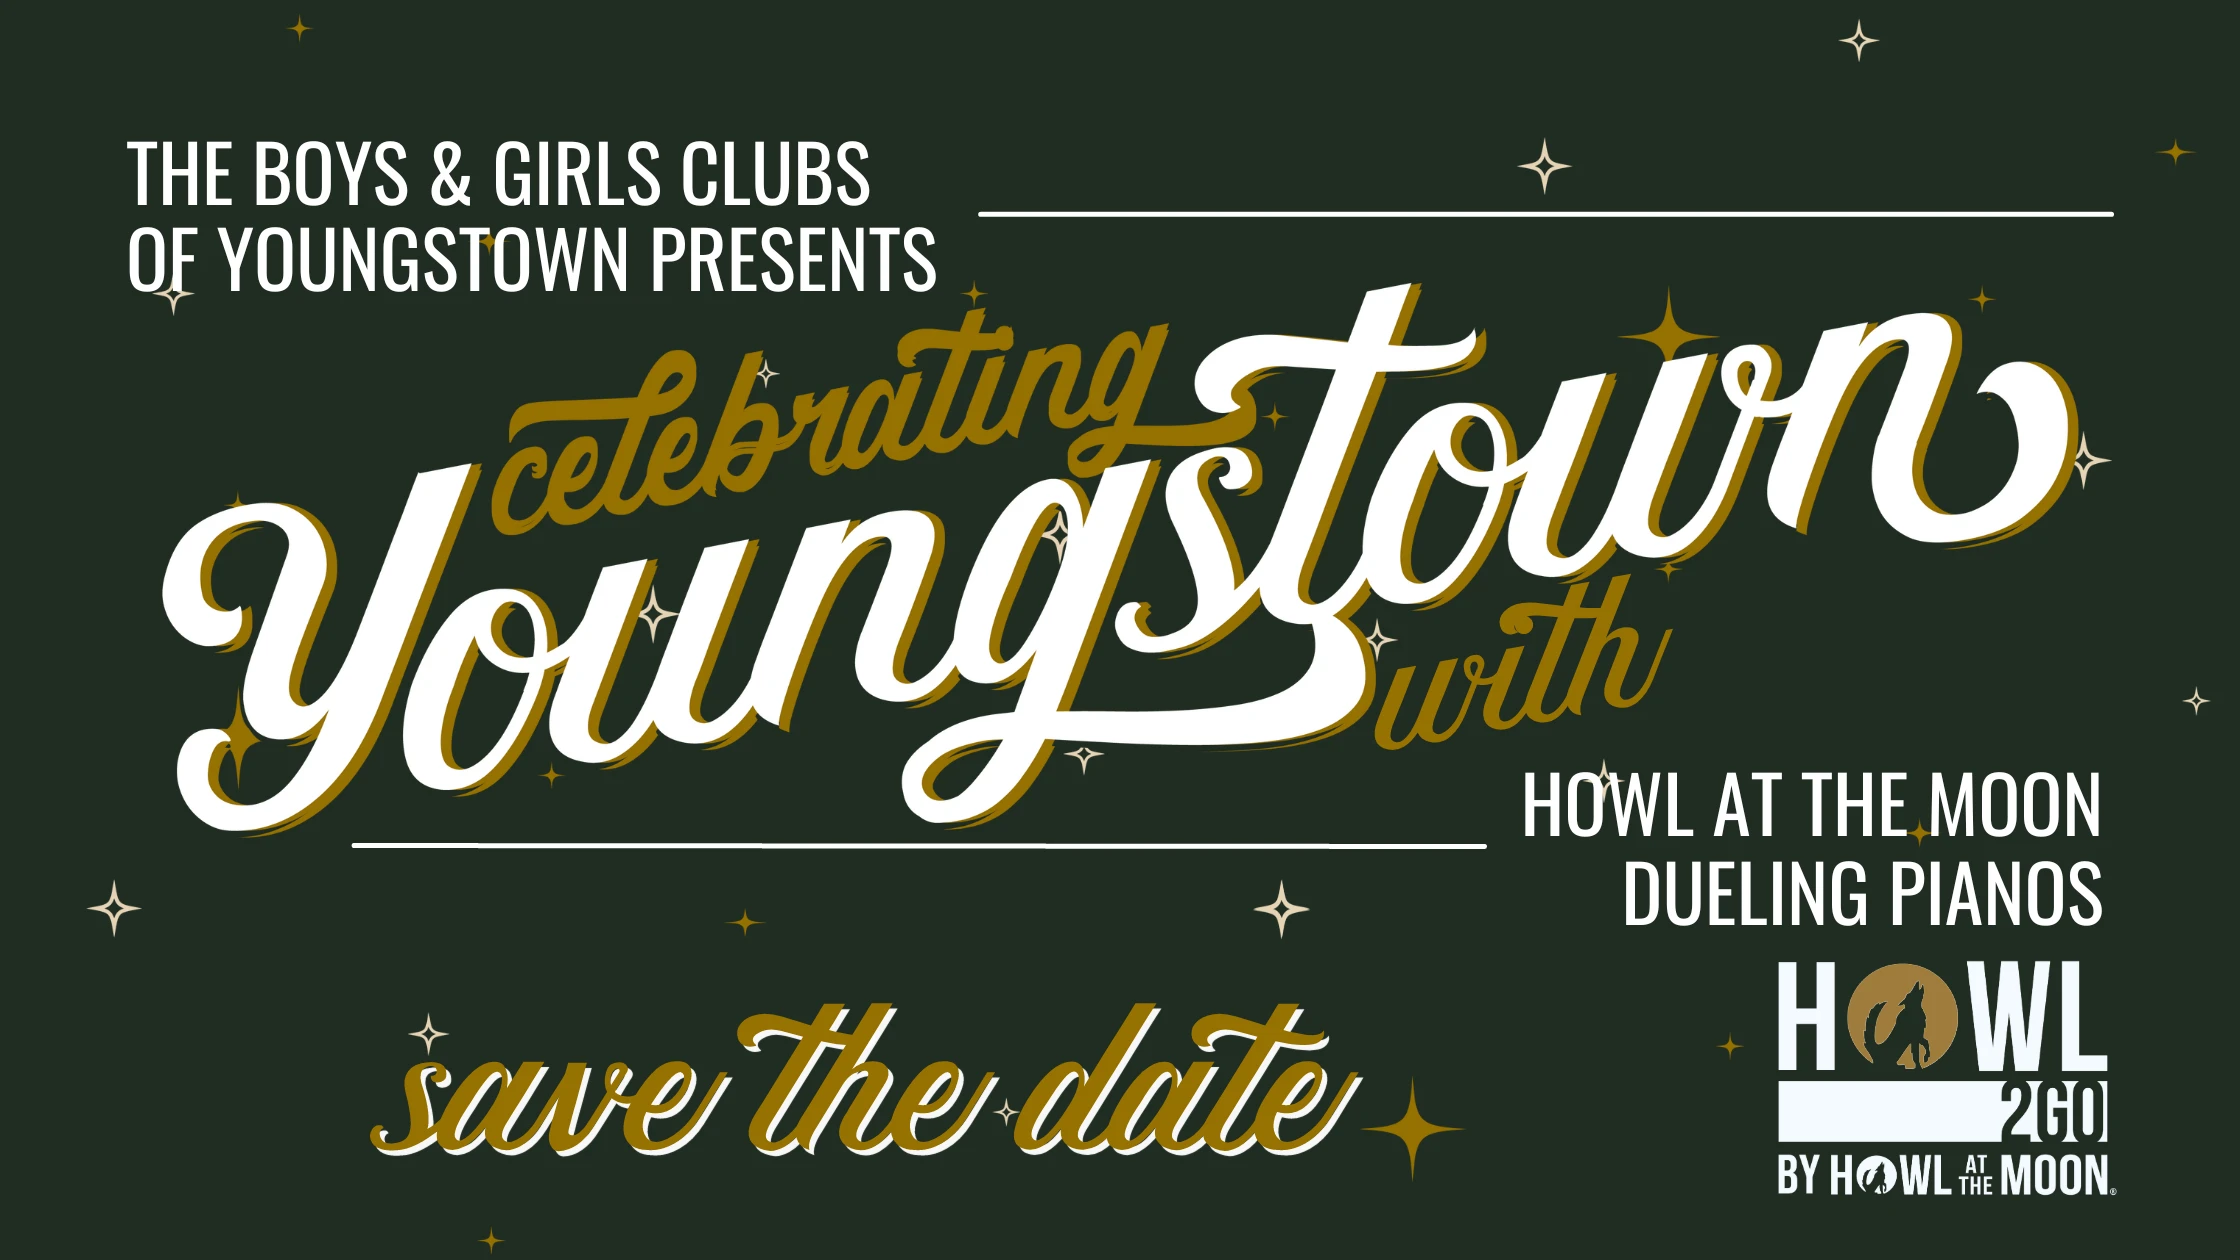 Celebrating Youngstown